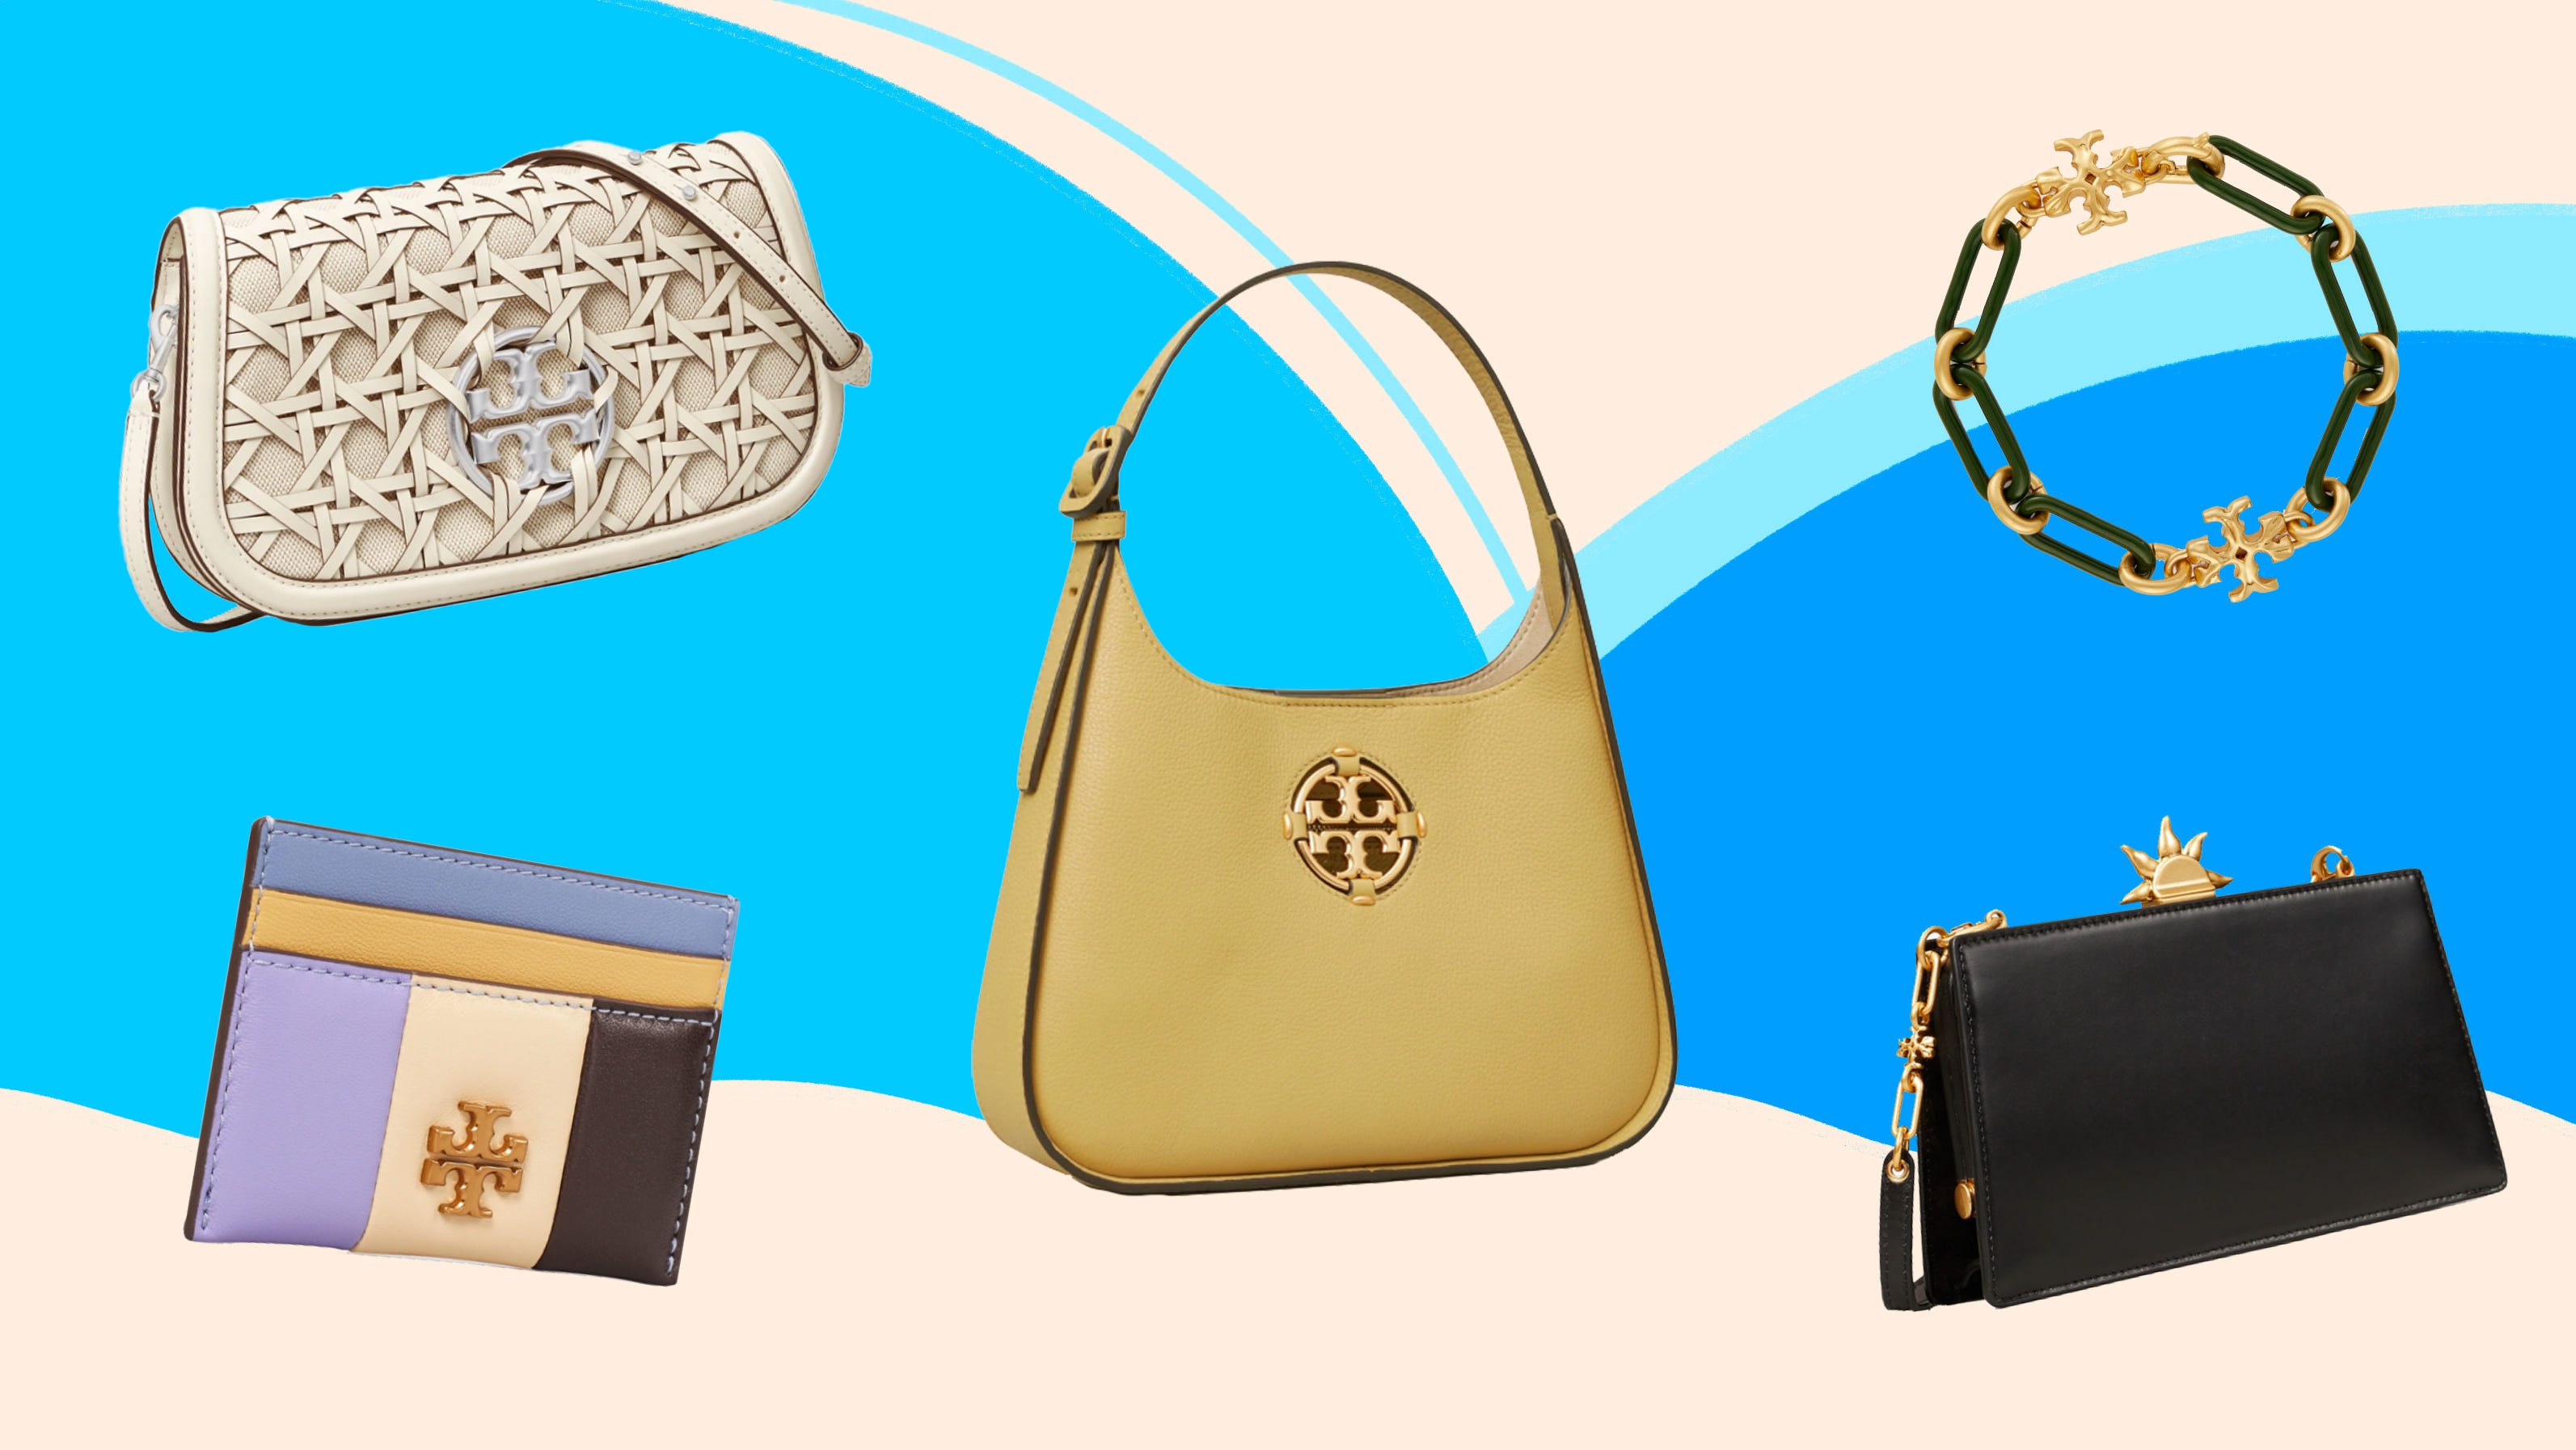 These Tory Burch deals are extra special with 25% off all sale styles—shop  now for chic bags, sandals and more